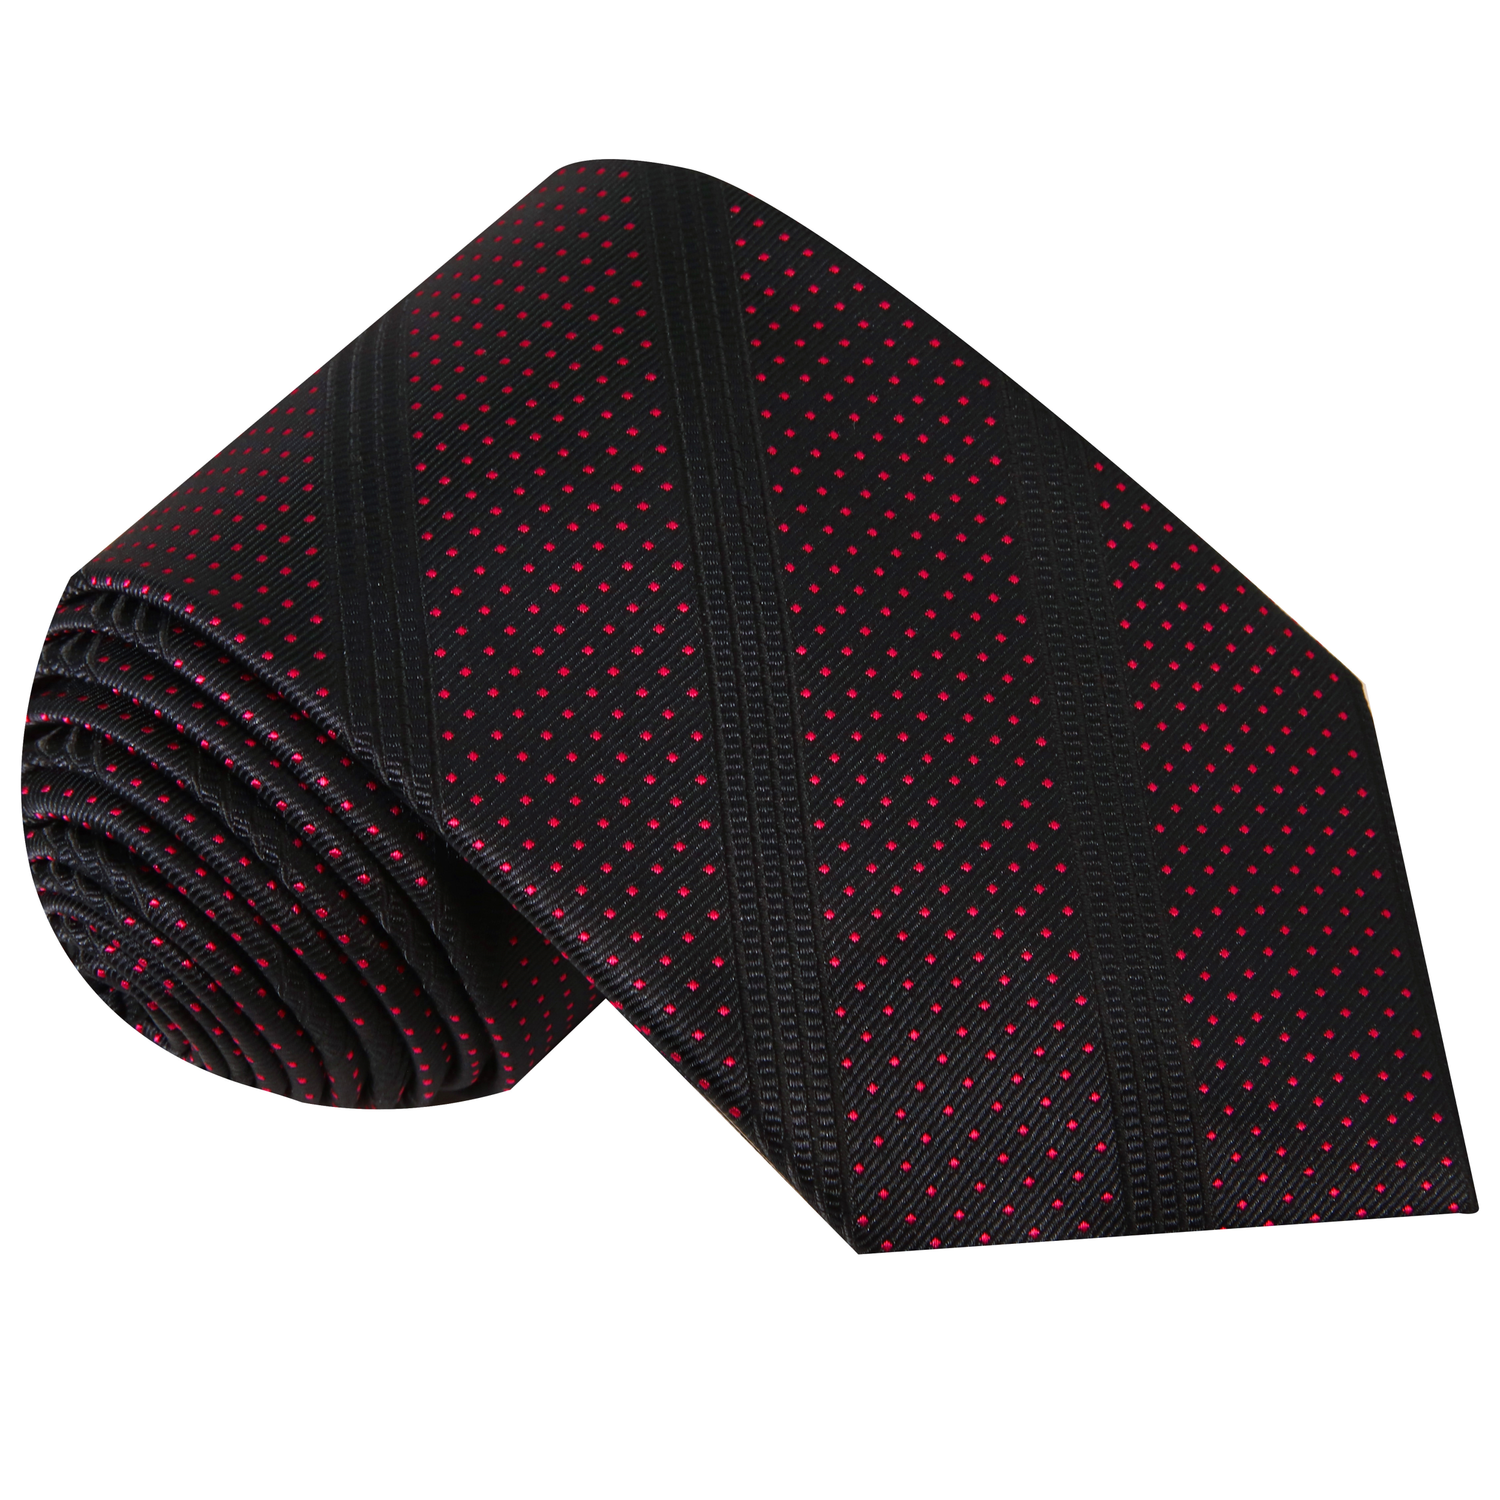 Tie Rolled Up: Black with Black Stripes Red Dots Necktie